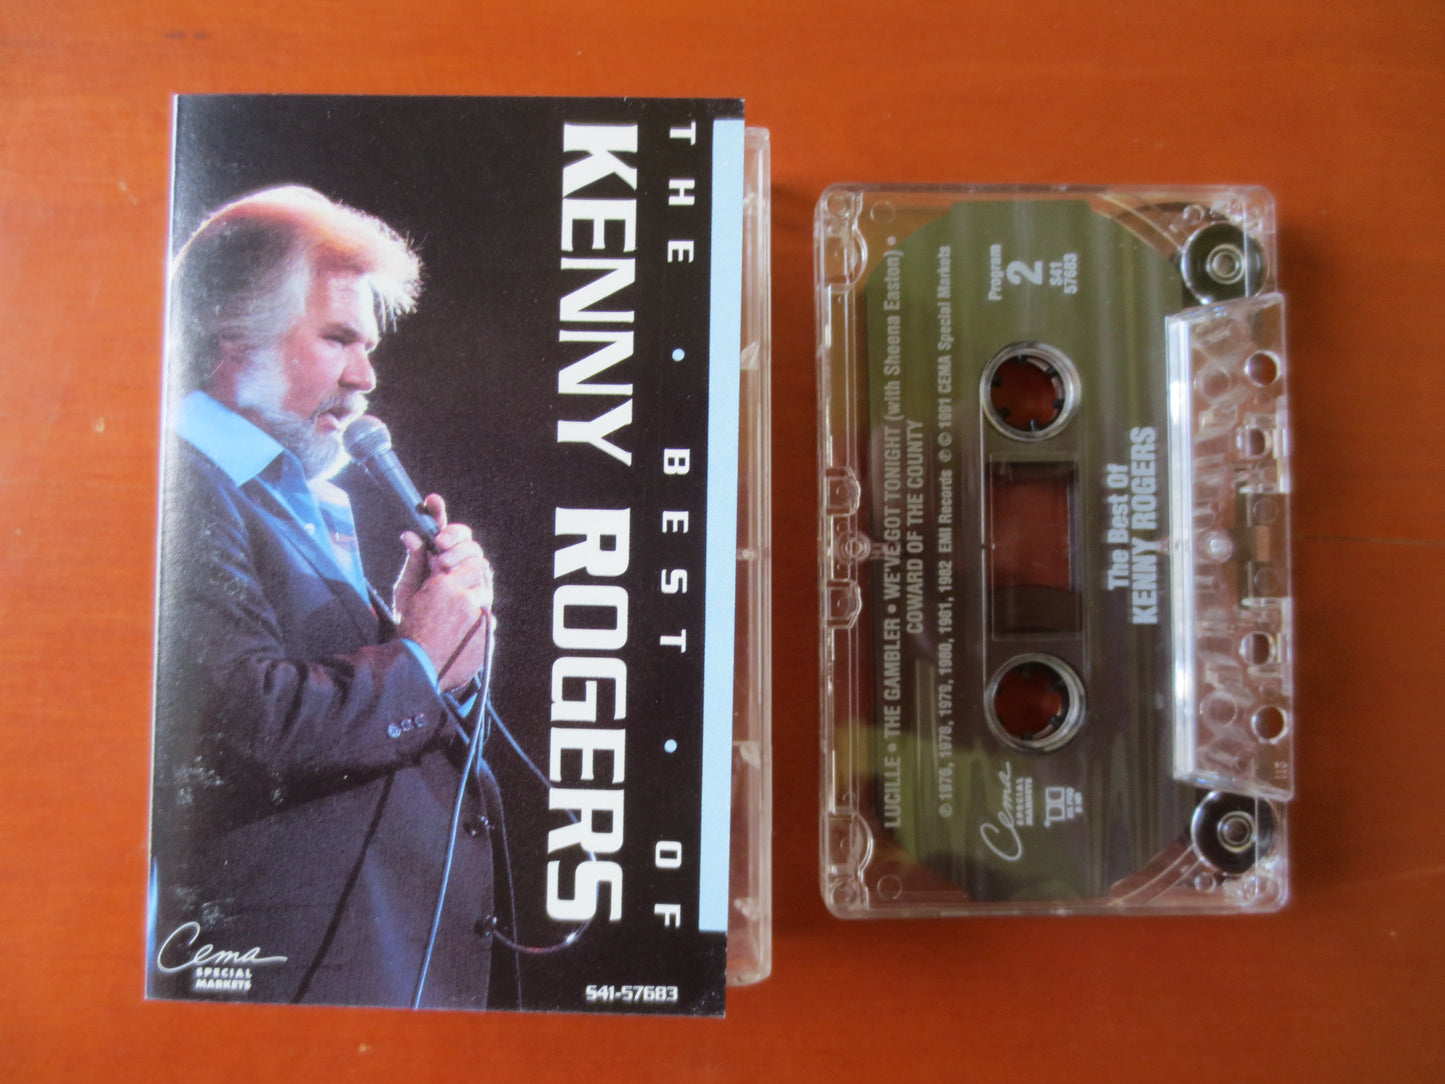 KENNY ROGERS, BEST of Albums, Kenny Rogers Tape, Kenny Rogers Album, Country Cassette, Music Tapes, Cassette, Music Cassette